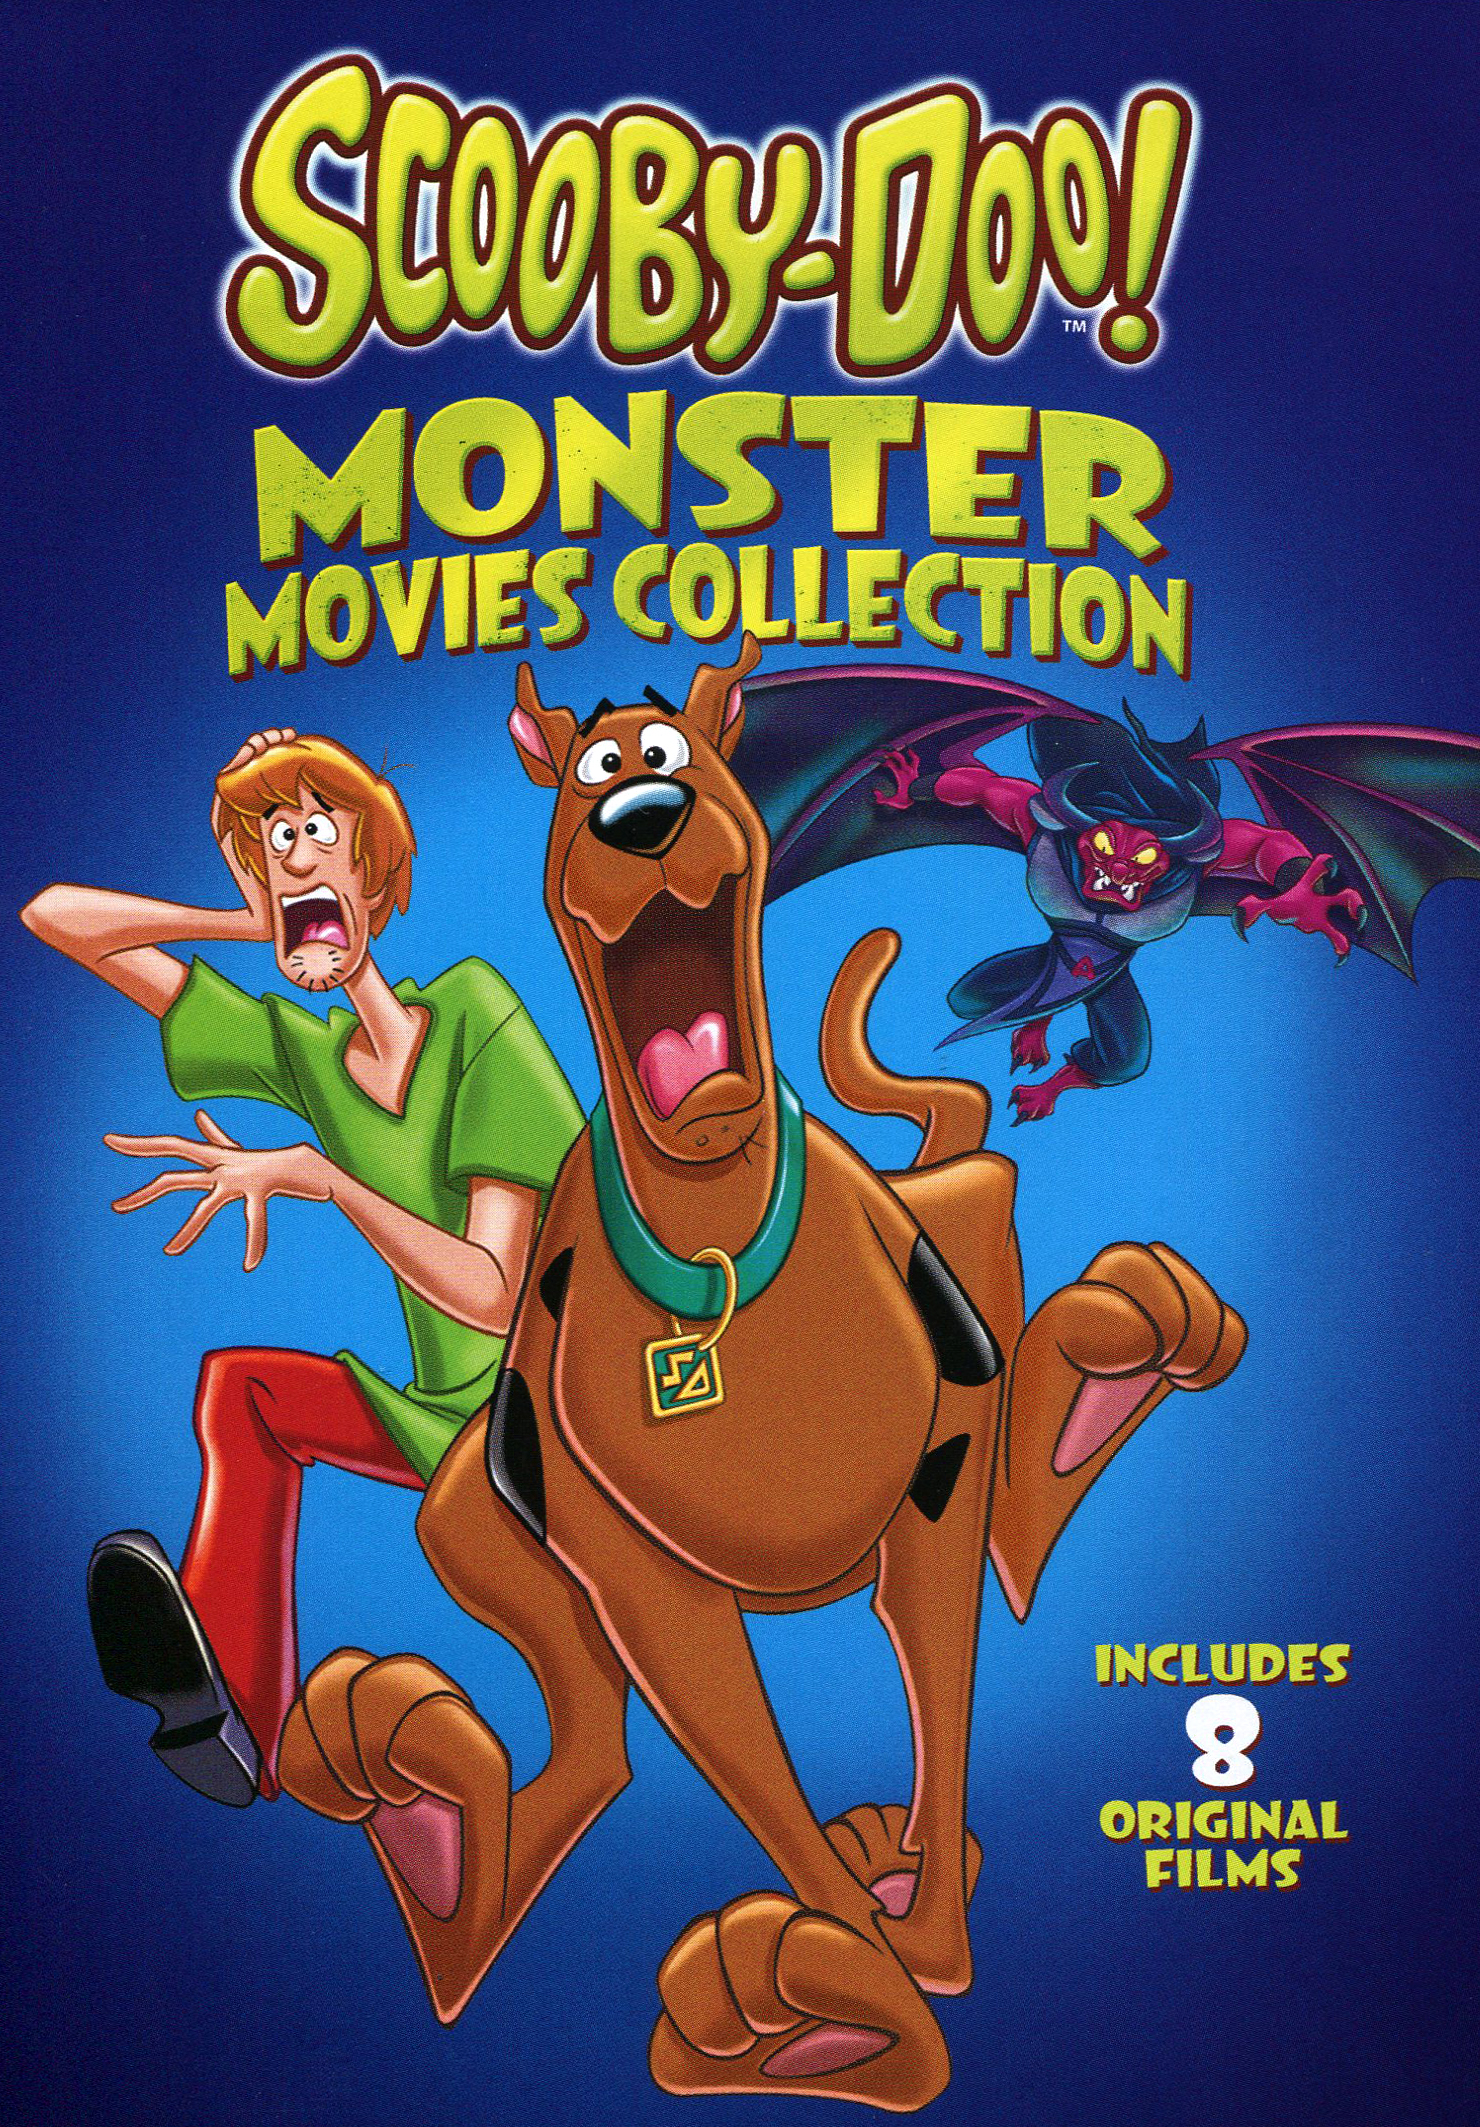  Scooby  Doo  Monster Movies Collection DVD  Best Buy